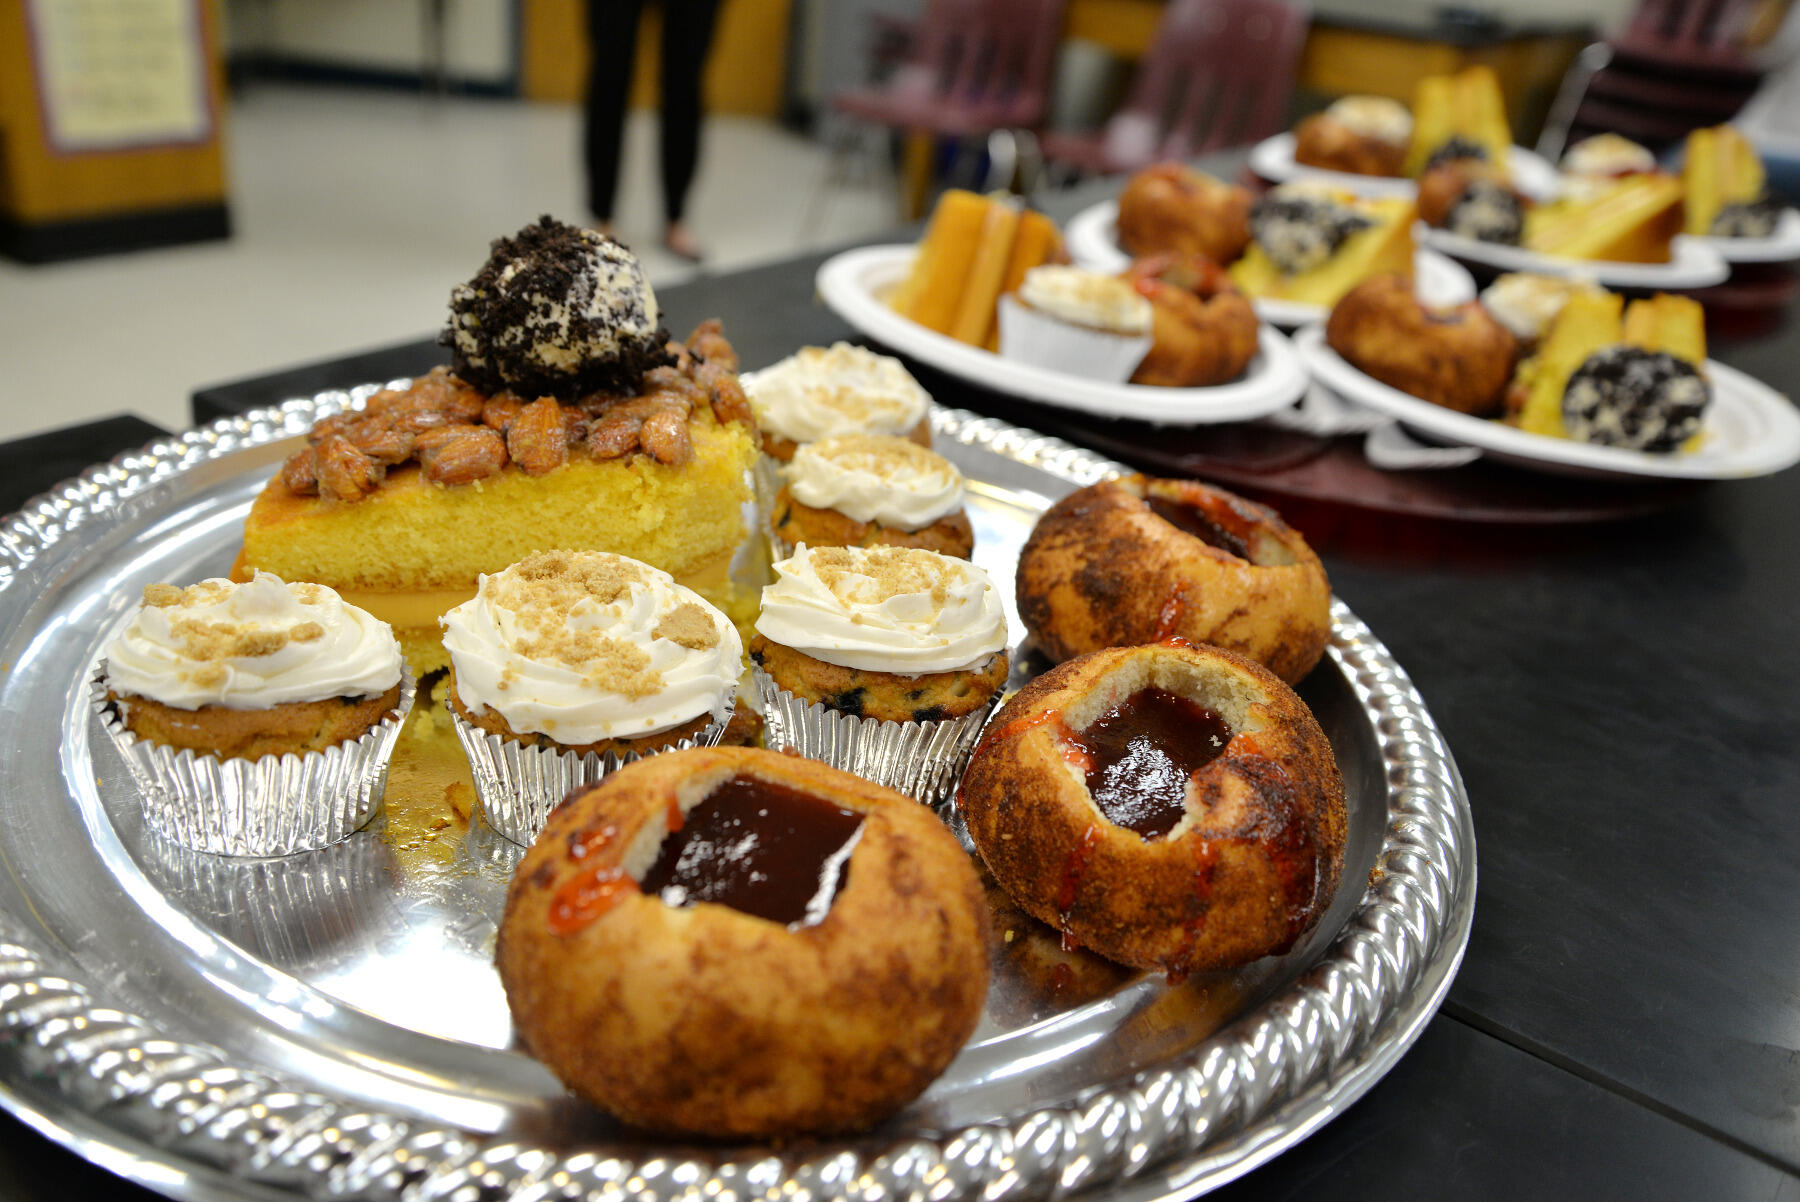 A team pitching "Worlds Collide Bakery" brought trays of samples of their baked goods from around the world. 